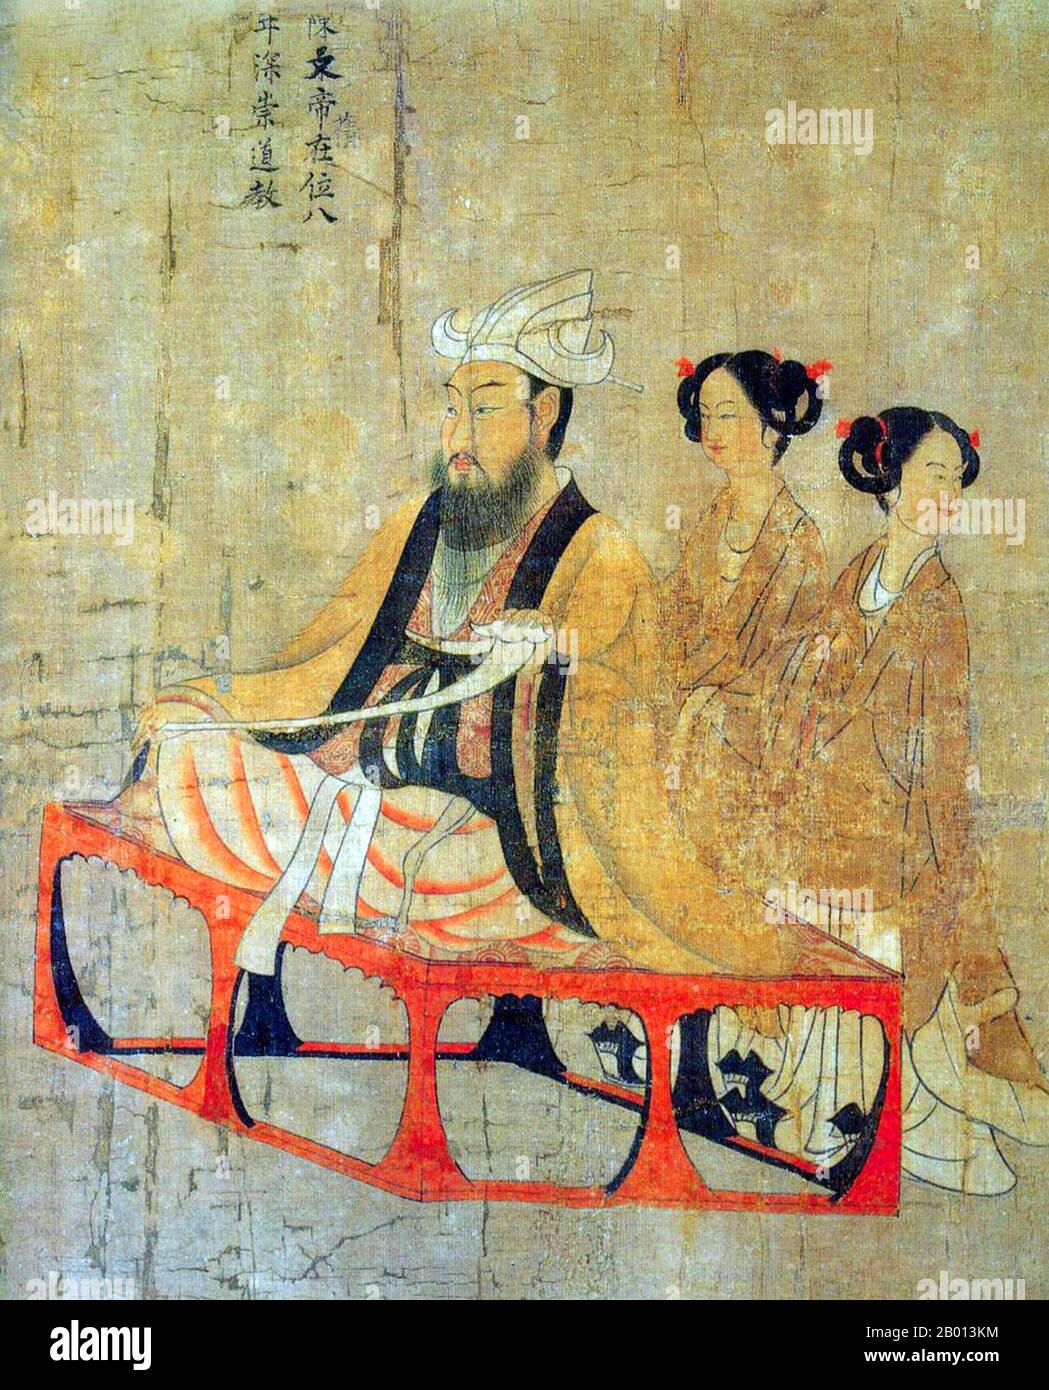 China: Emperor Wen of Chen (522–566). Handscroll painting from the 'Thirteen Emperors Scroll' by Tang Dynasty court painter Yan Liben (600-673), 7th century.  Emperor Wen of Chen, personal name Chen Qian and courtesy name Zihua, was an emperor of the Chen Dynasty. He was the nephew of the founding emperor, Emperor Wu (Chen Baxian), and after Emperor Wu's death in 559, the officials supported him to be emperor since Emperor Wu's only surviving son, Chen Chang, was detained by rival Northern Zhou. At the time he took the throne, Chen had been devastated by war during the preceding Liang Dynasty. Stock Photo